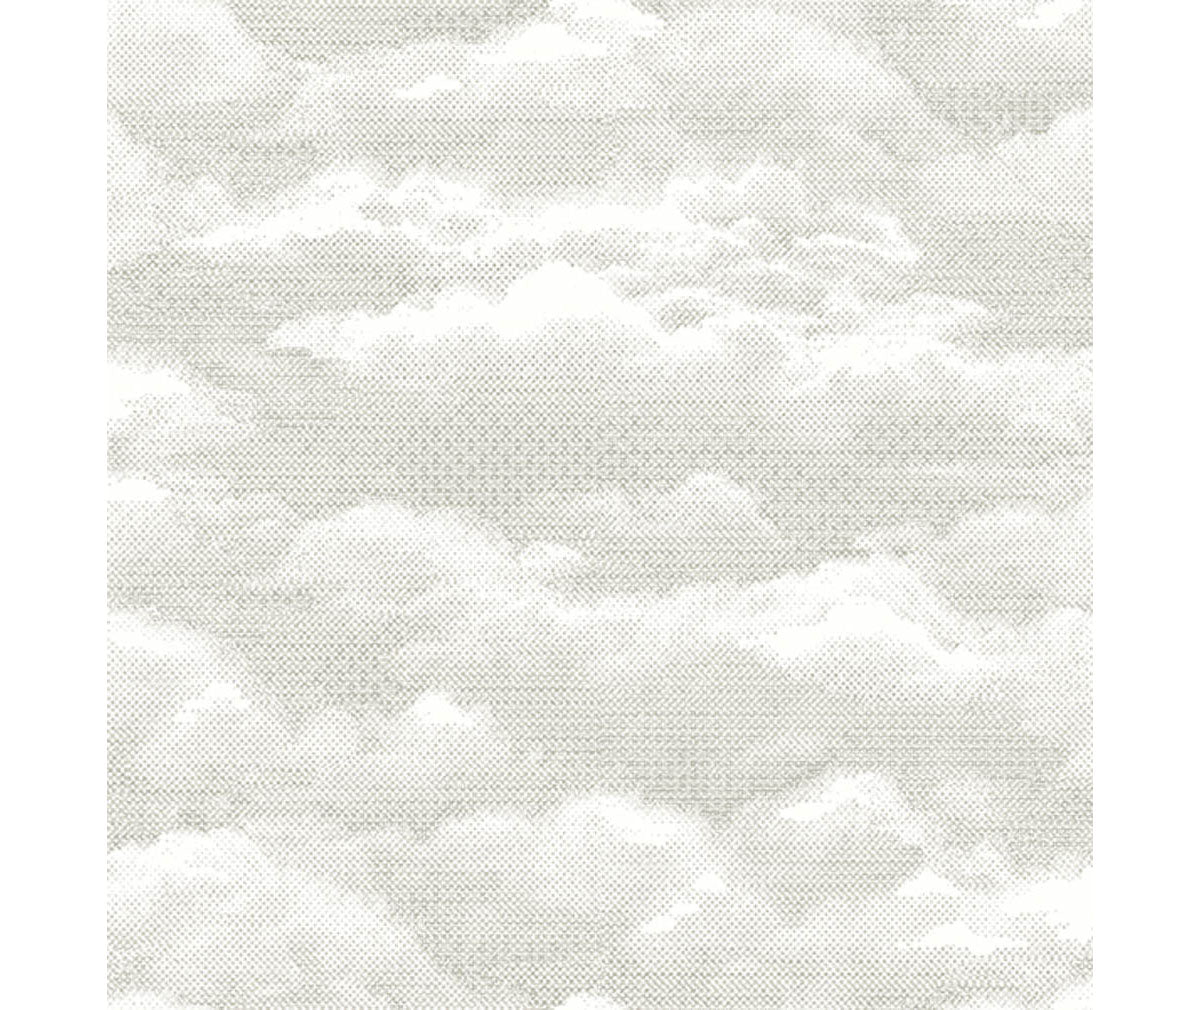 Solstice Pearl Cloud Wallpaper available at Barrydowne Paint